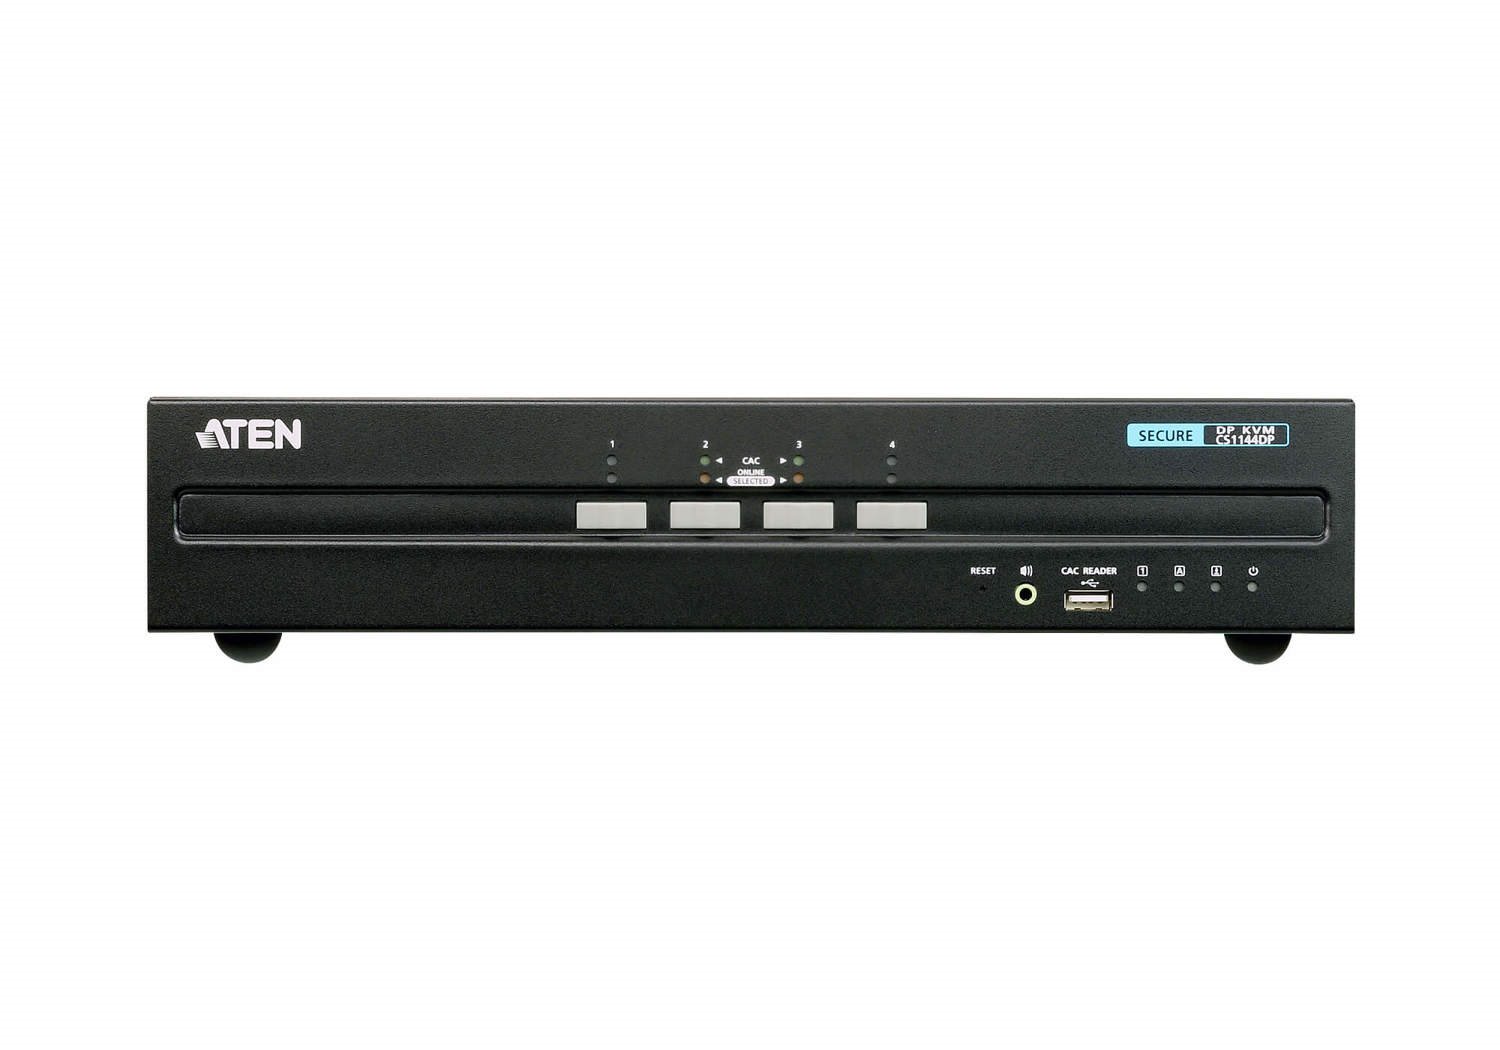 Aten 4-Port Usb DisplayPort Dual Display Secure KVM Switch (PSS PP V3.0 Compliant), Enable And Disable Cac Devices BY Port, With Cac Black